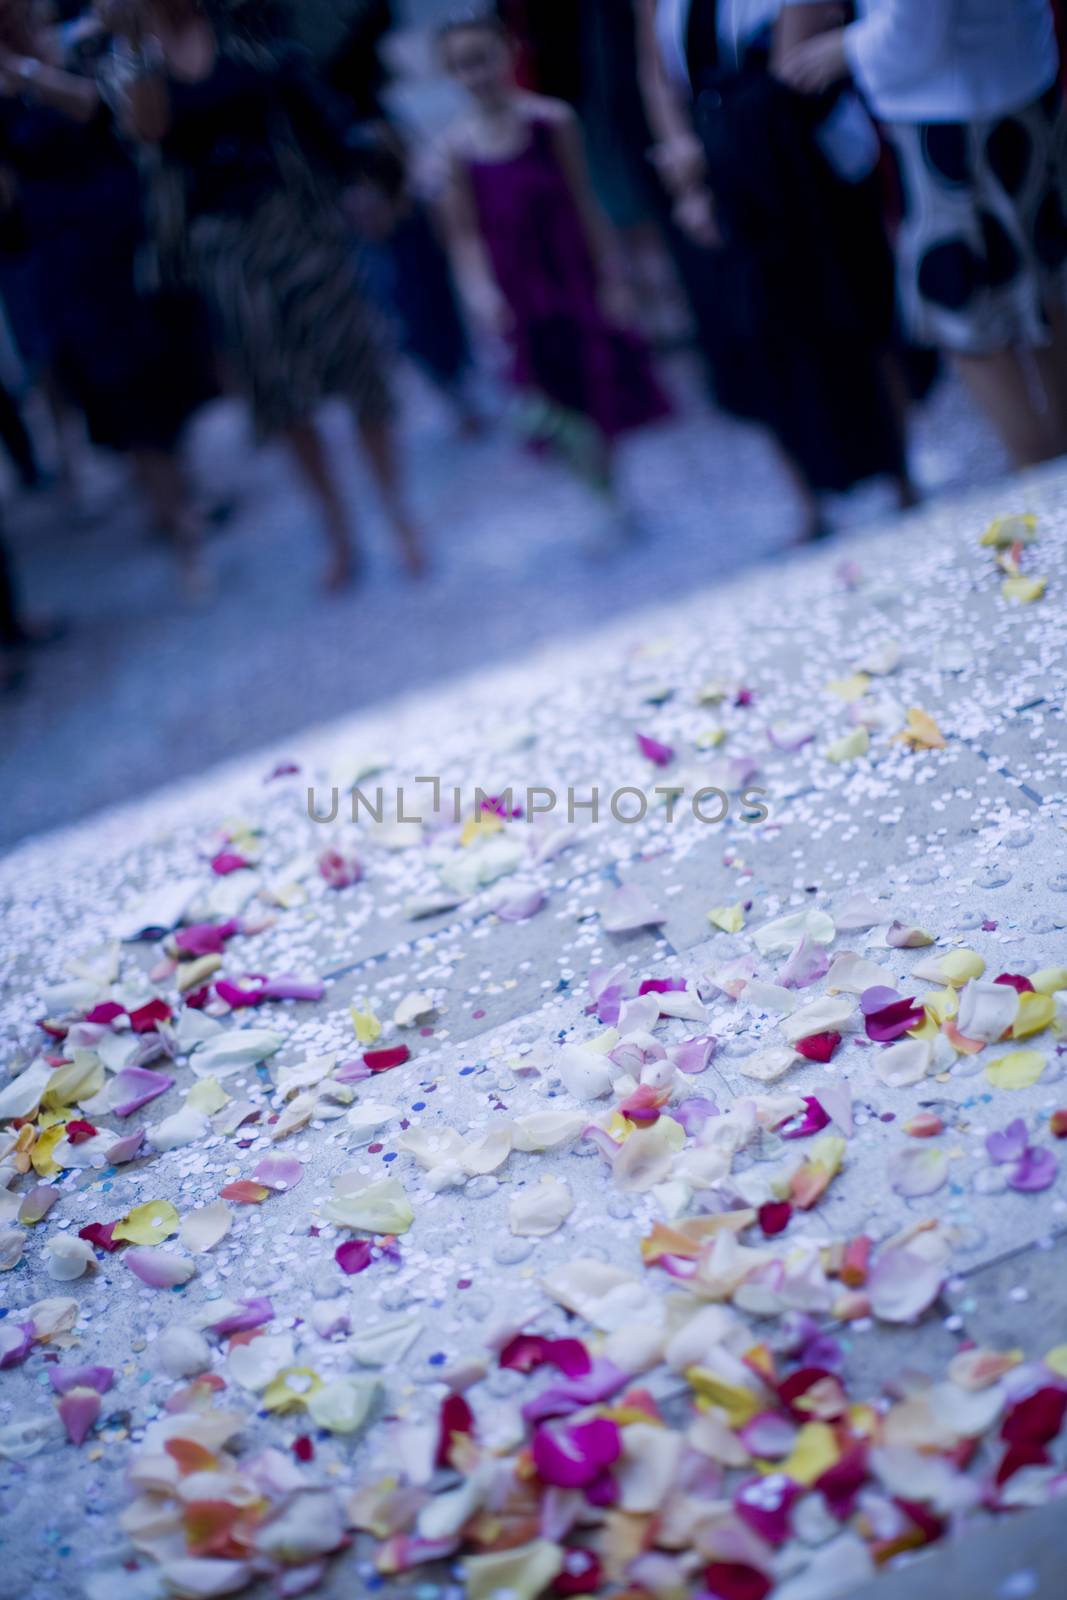 Color artistic digital rectangular vertical photo of Wedding confetti on ground after marriage ceremony outside church in Barcelona Spain. Shallow depth of with background out of focus. 